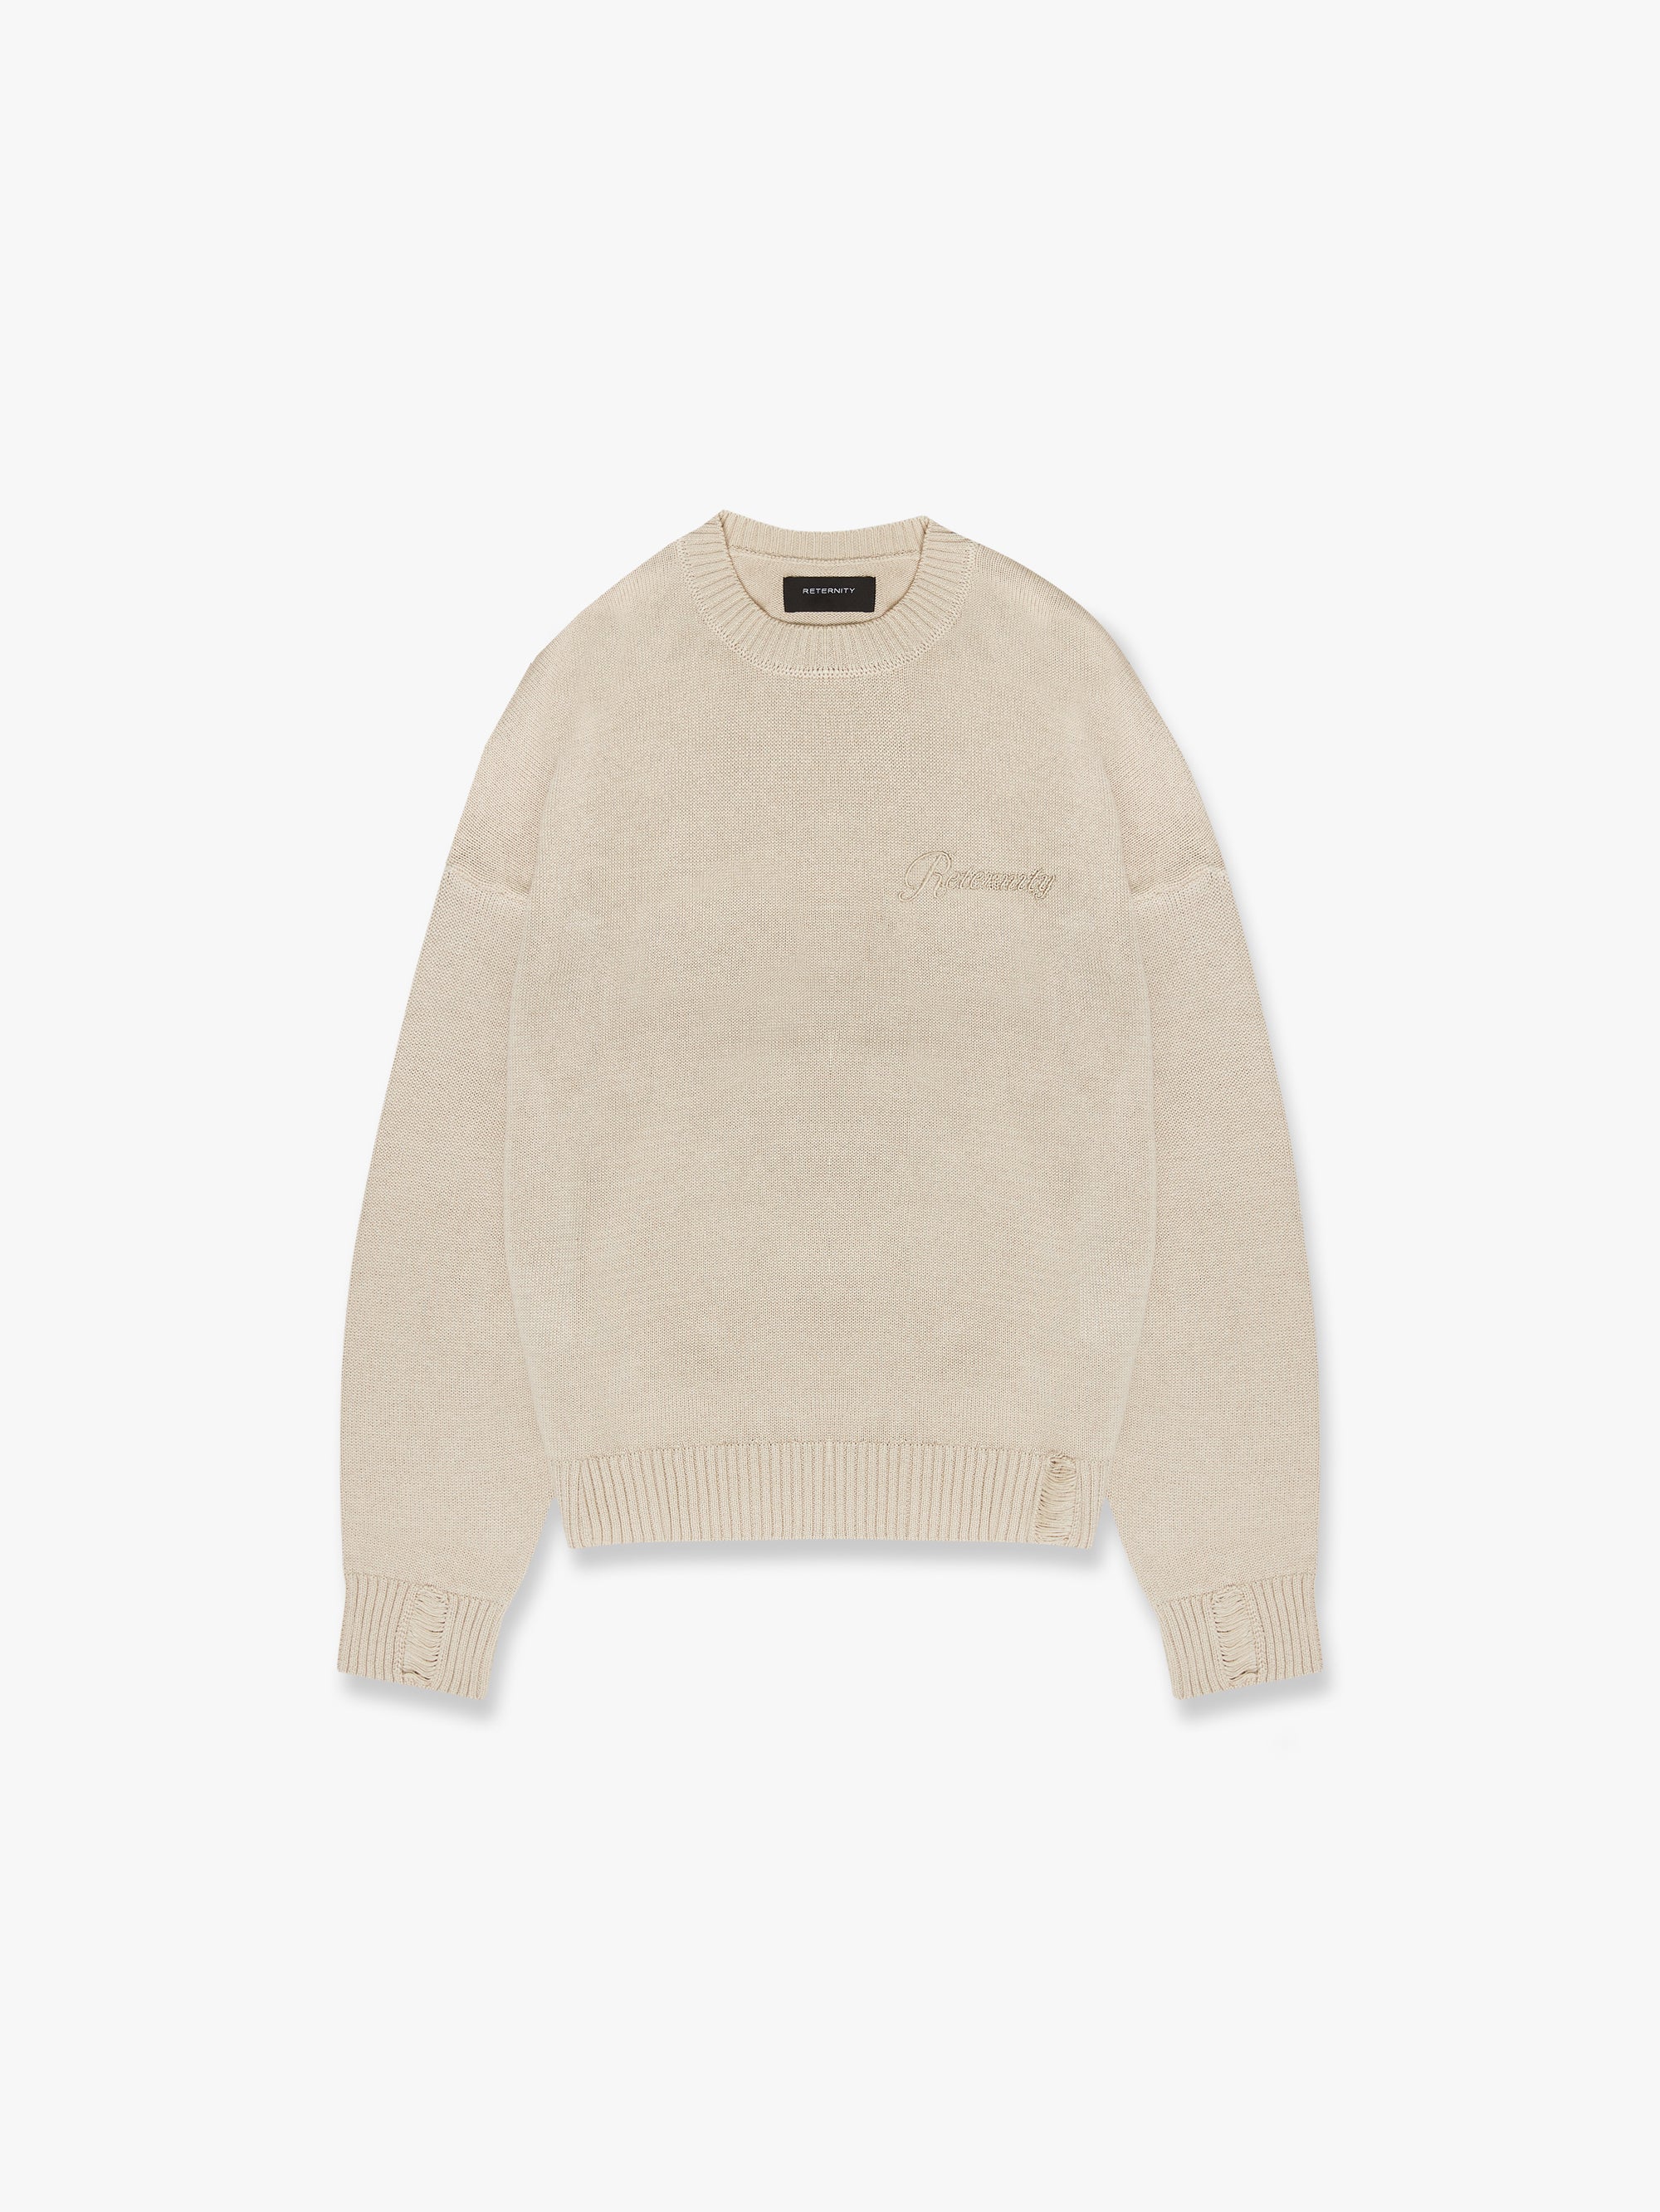 RETERNITY KNIT SWEATER - TAUPE